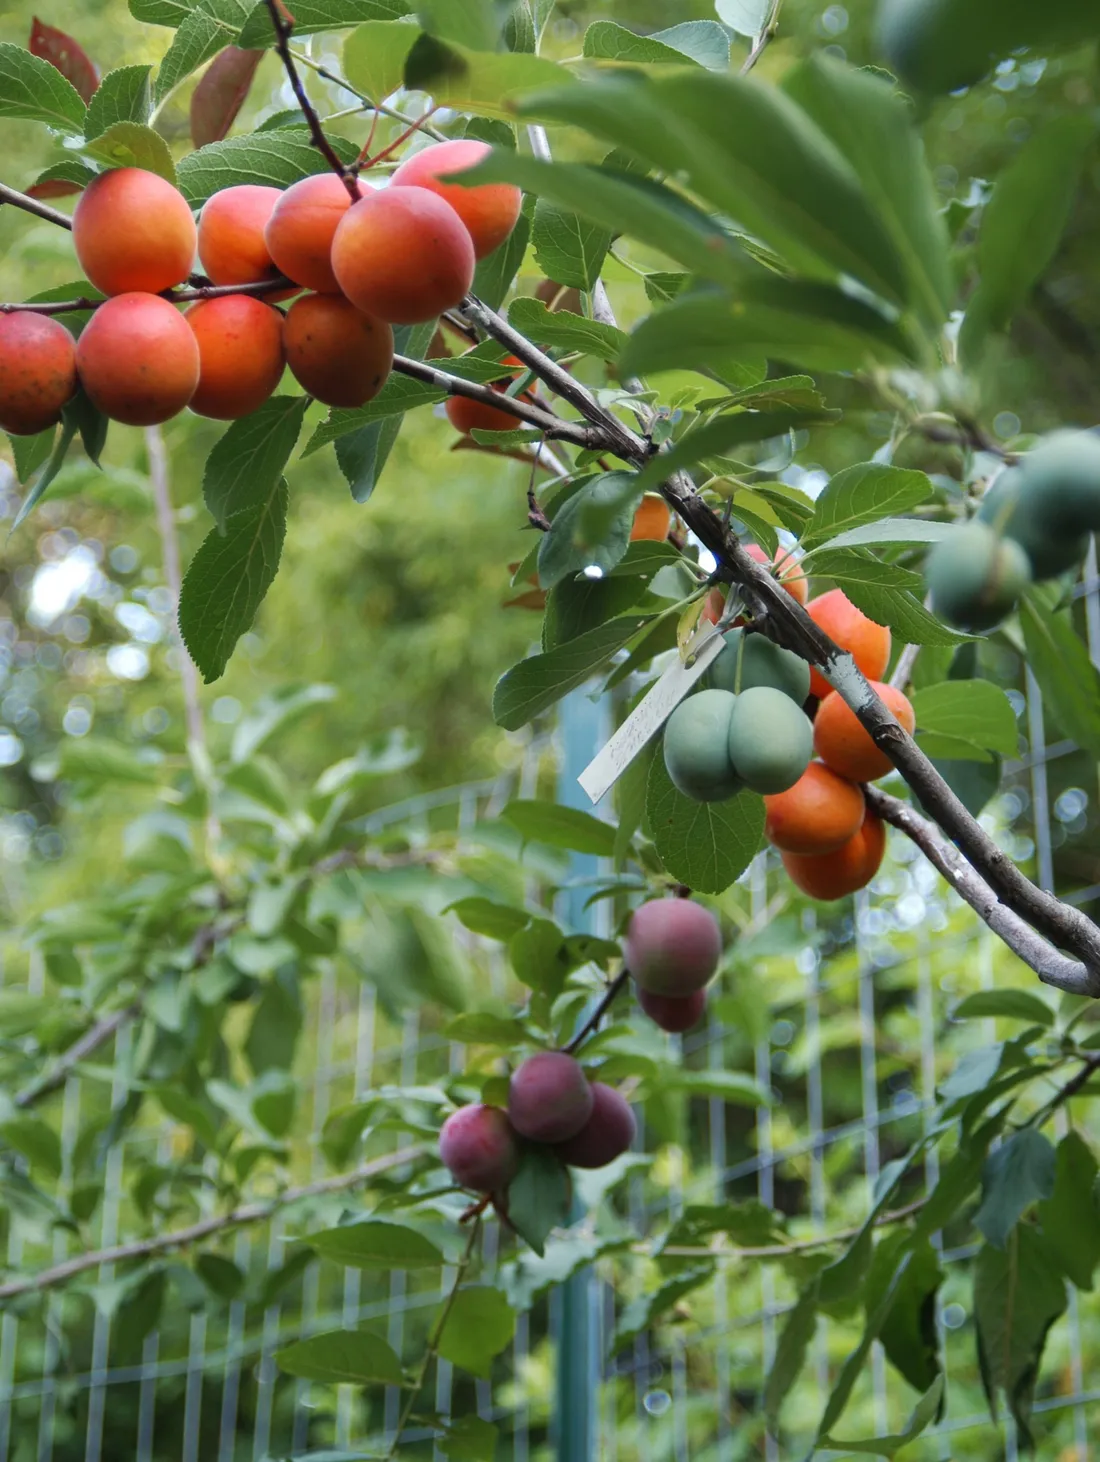 Tree limbs with multiple colored peaches and plums.